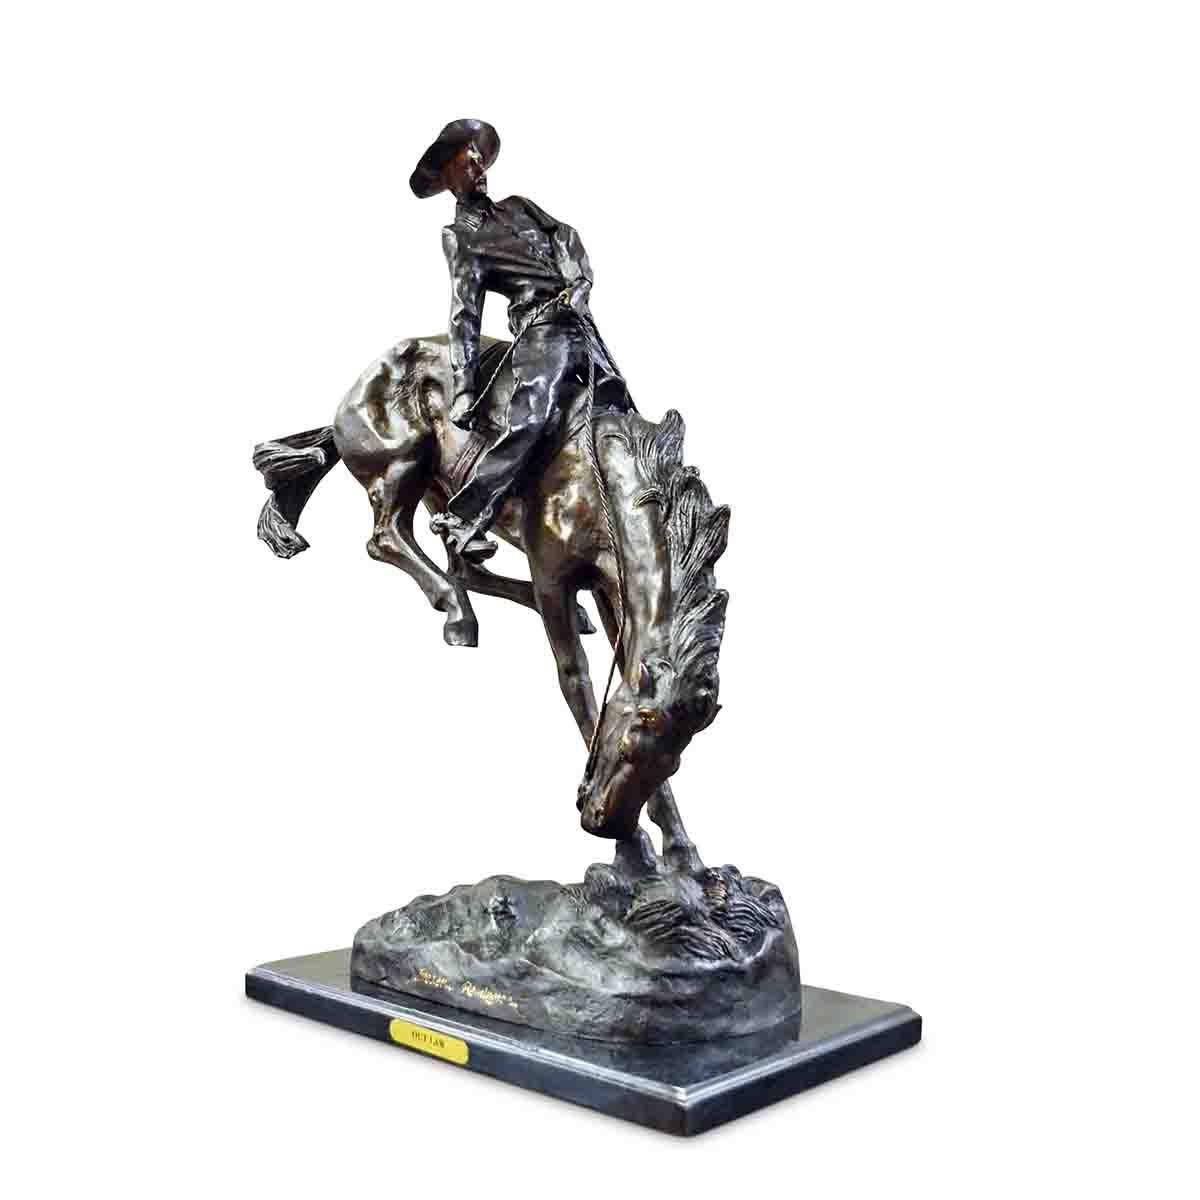 20th Century Outlaw Cast Bronze Sculpture on Marble Base, after Frederic Remington